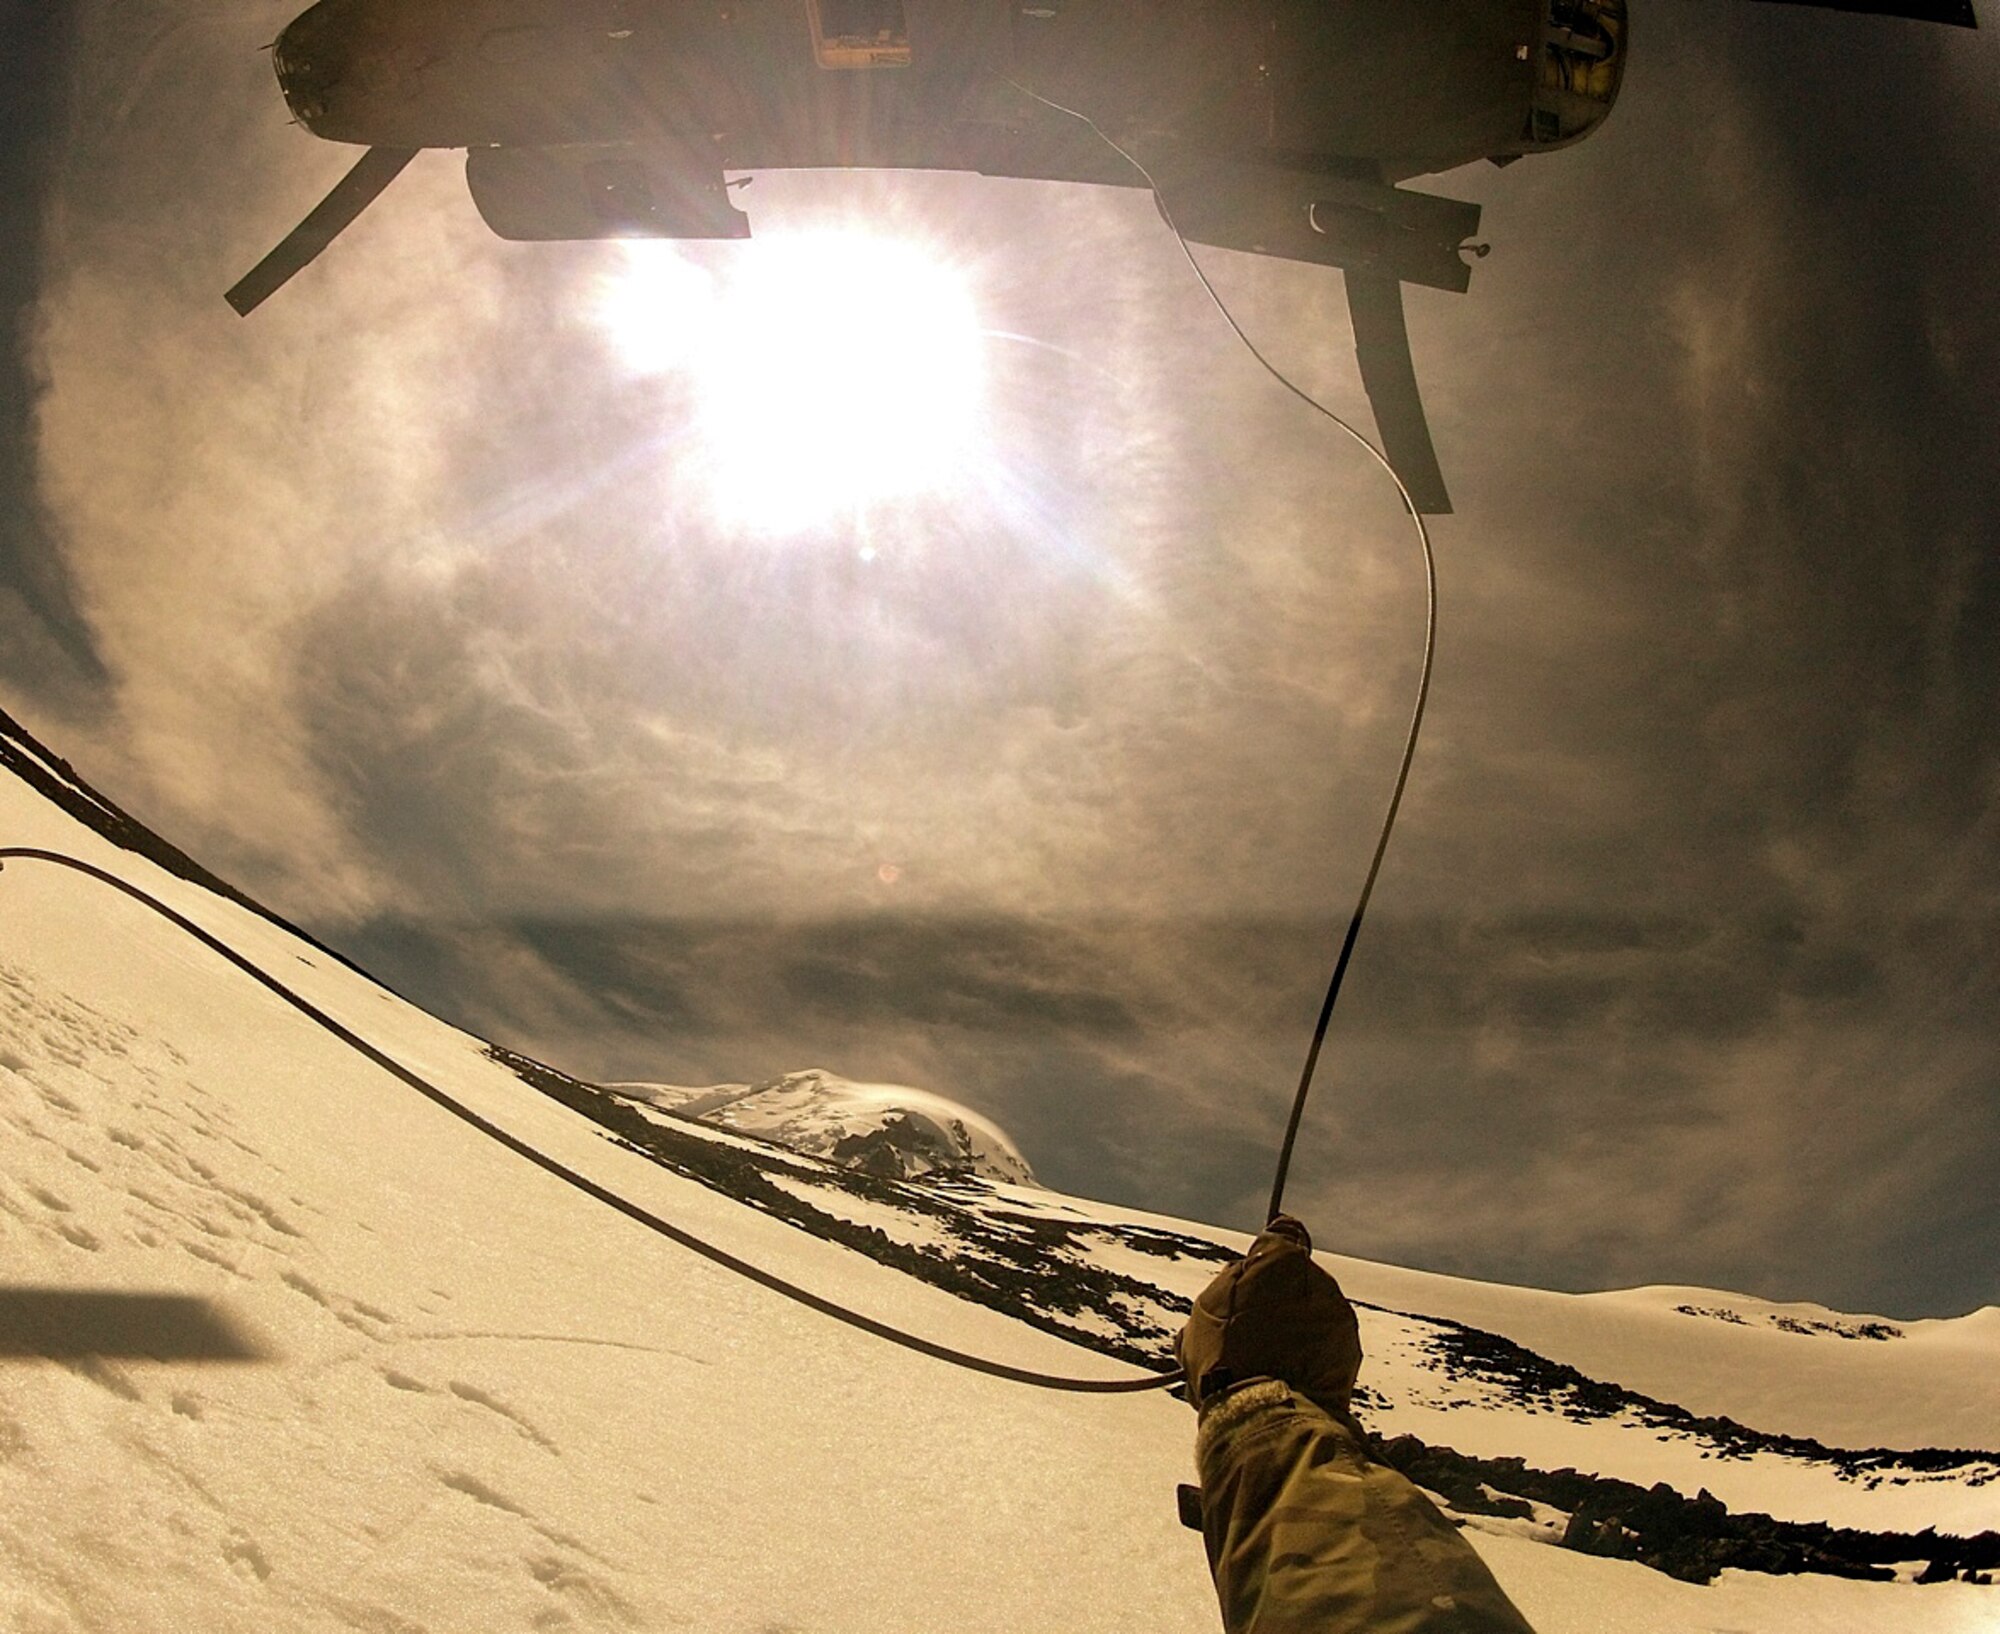 Master Sgt. Kim Brewer, 22nd Special Tactics Squadron NCO in charge of weapons and tactics, prepares to release his connection from a Boeing CH-47 Chinook helicopter after anchoring himself to the mountain May 28, 2014, on Mount Rainier, Wash. Brewer is an expert mountain climber who has summited Mount Rainier, Mount Baker, Mount St. Helens, and Mount Adams numerous times each making his experience vital to the success of this mission. (U.S. Air Force photo/Master Sgt. Kim Brewer) 

